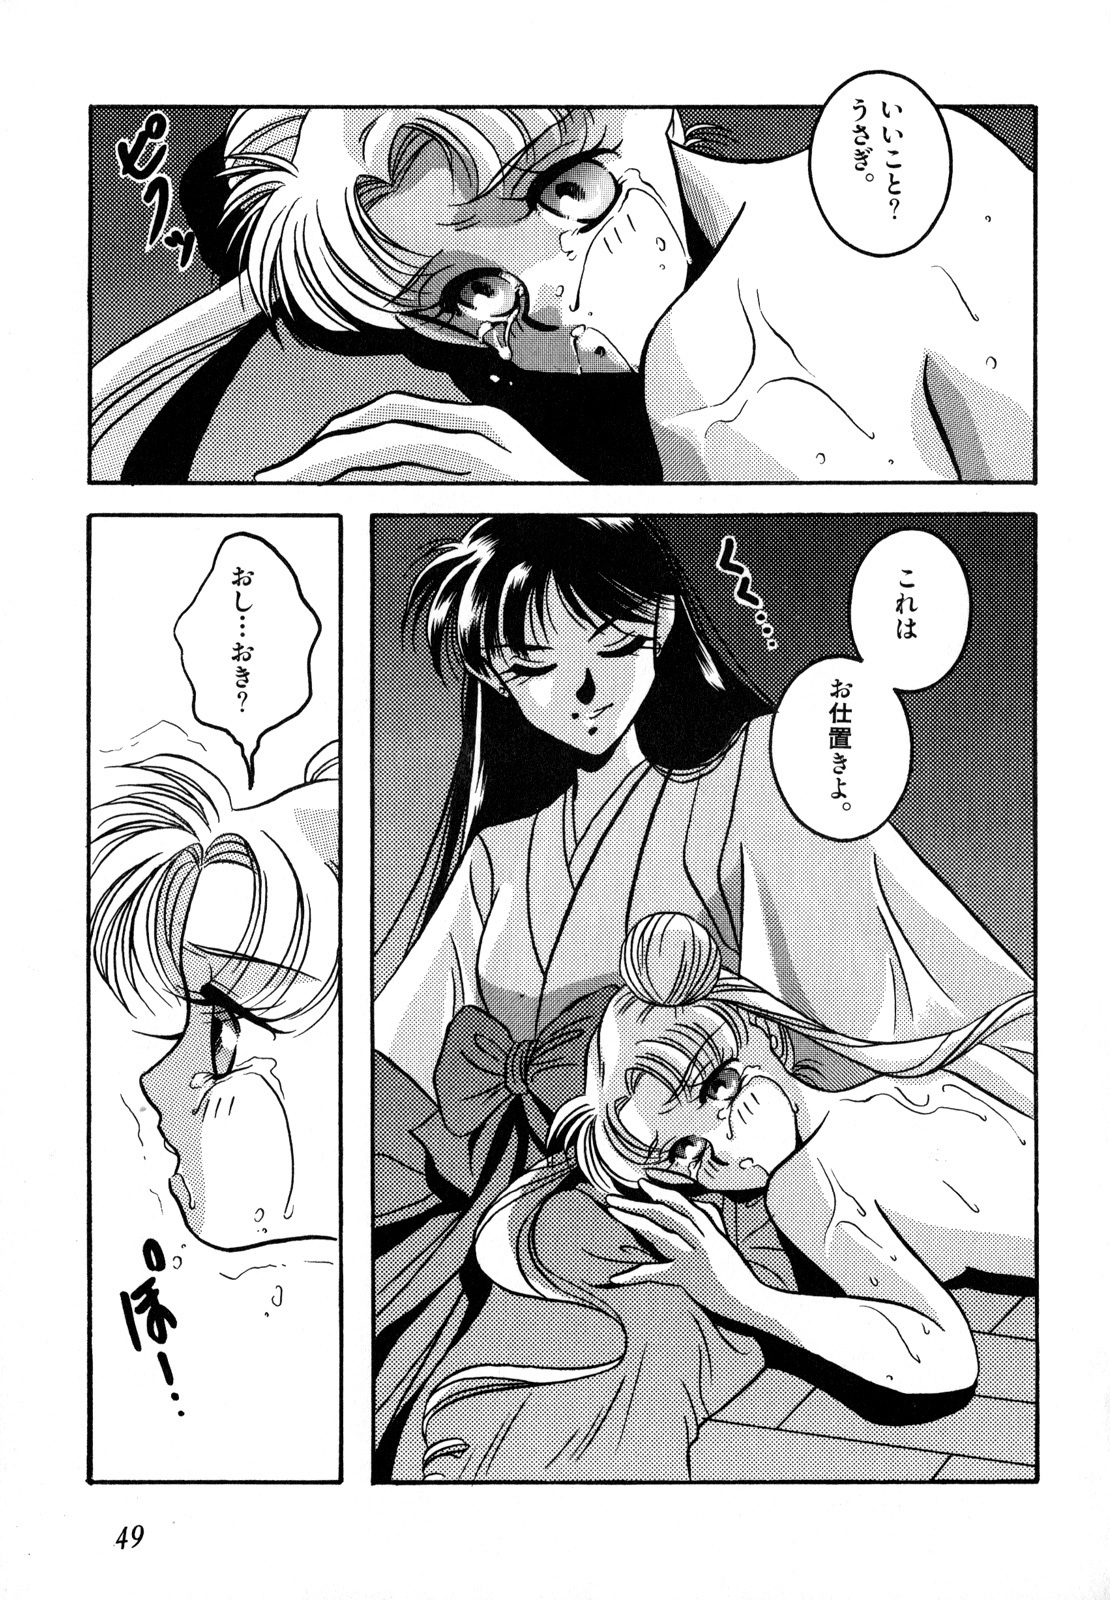 [Anthology] Lunatic Party 2 (Sailor Moon) page 50 full